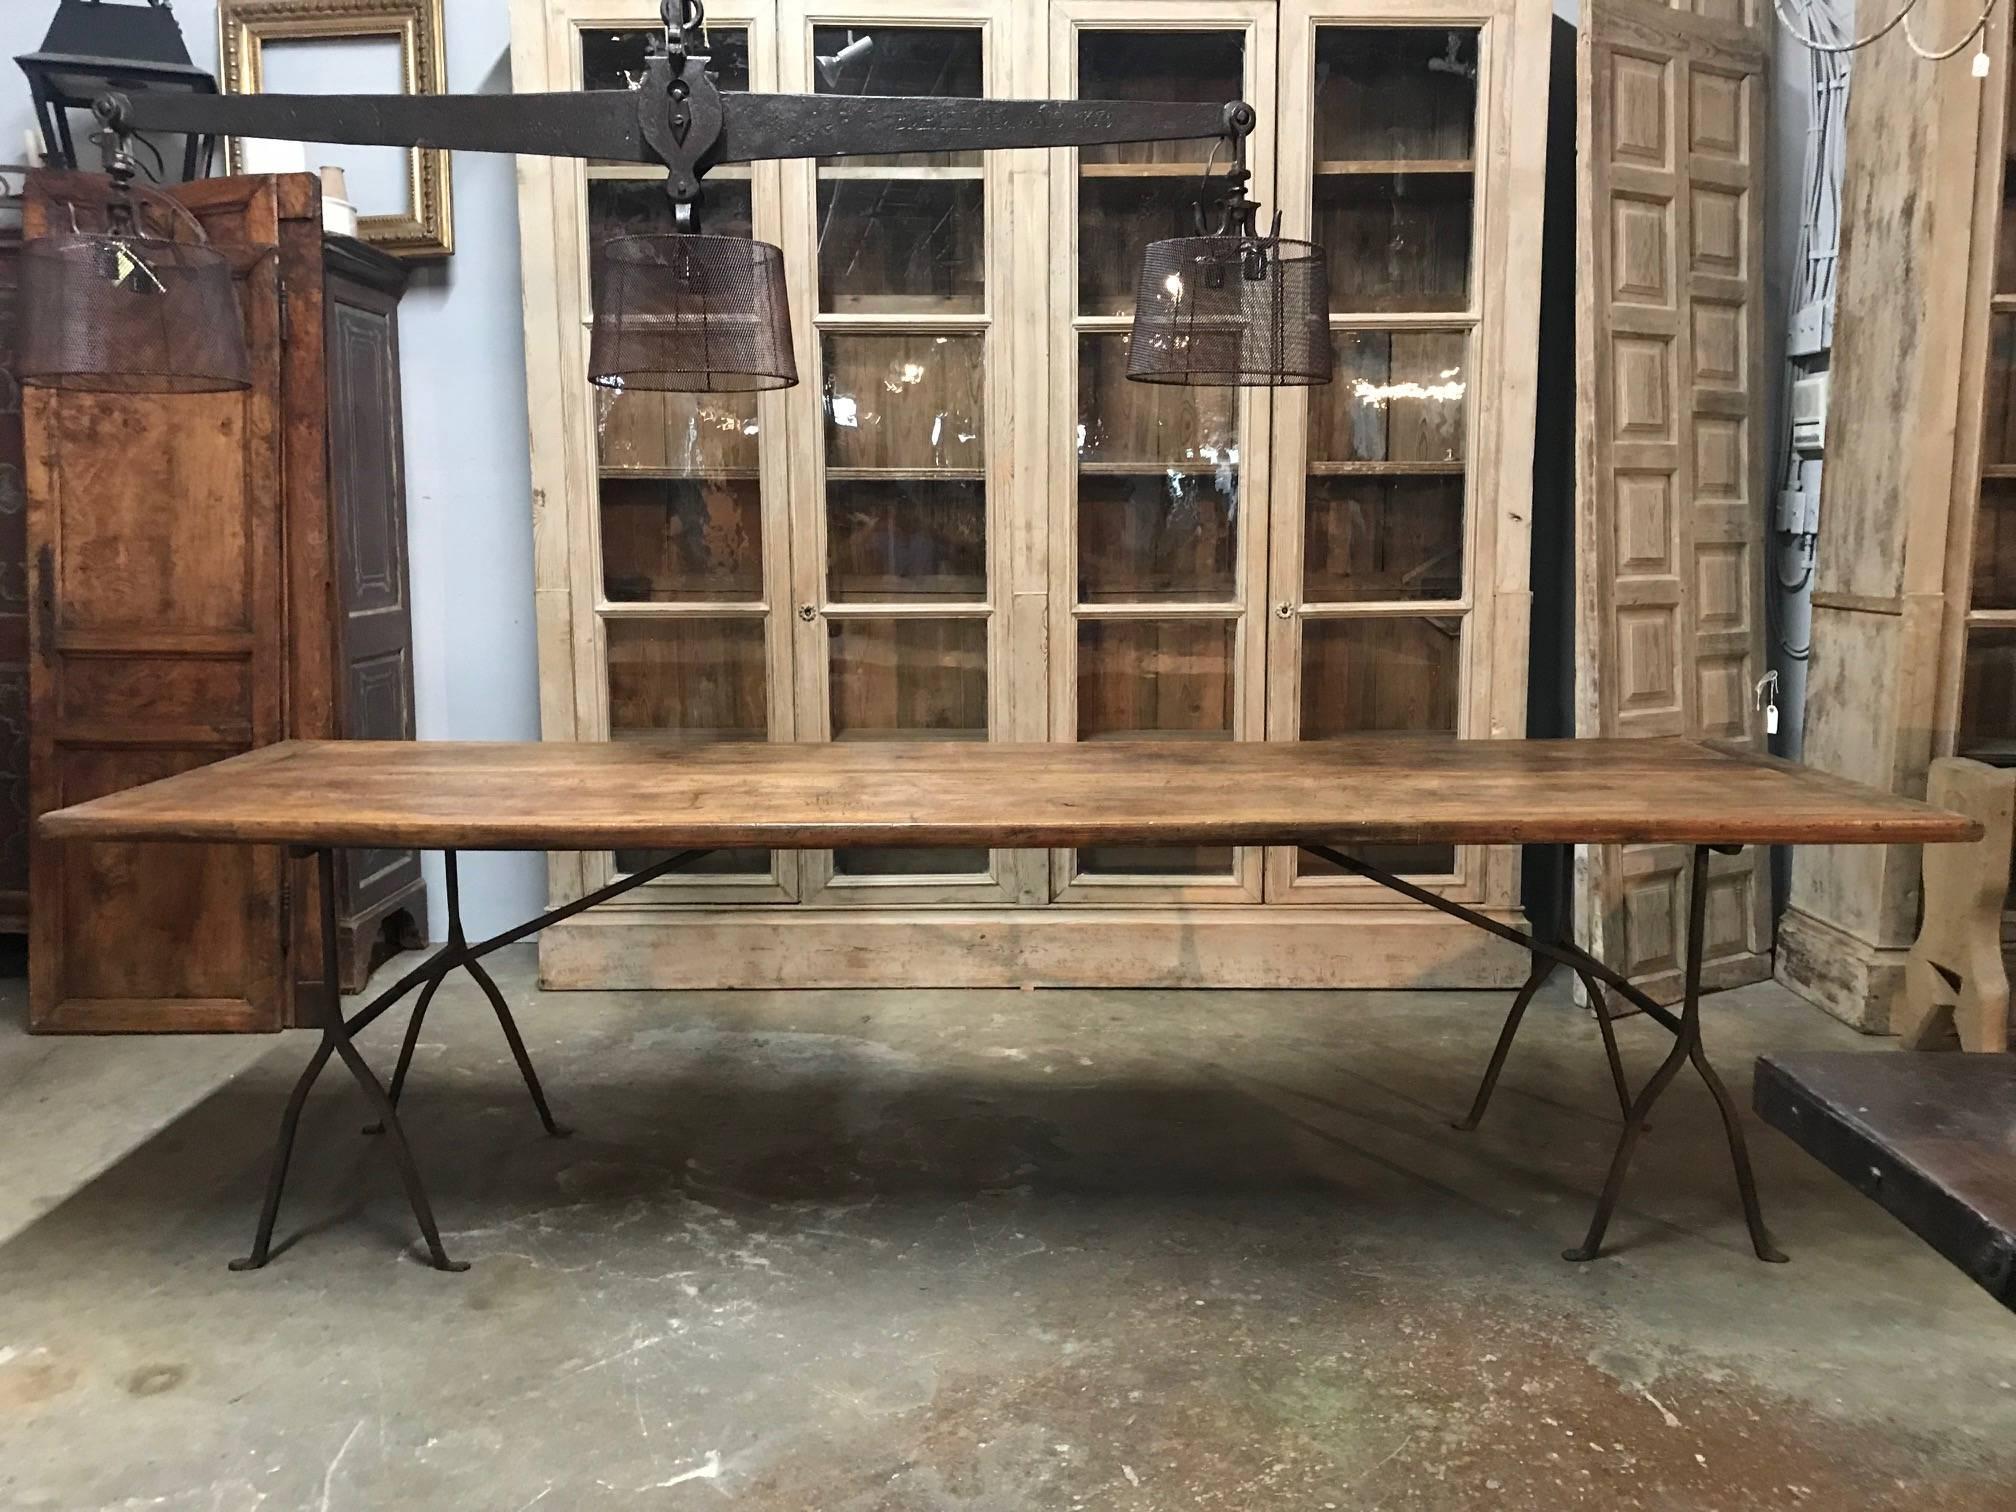 A very handsome early 19th century Northern Italian Dining Table with a very beautiful walnut top and iron base. Very sound and sturdy. Terrific patina. A wonderful table for any dining room or covered porch.